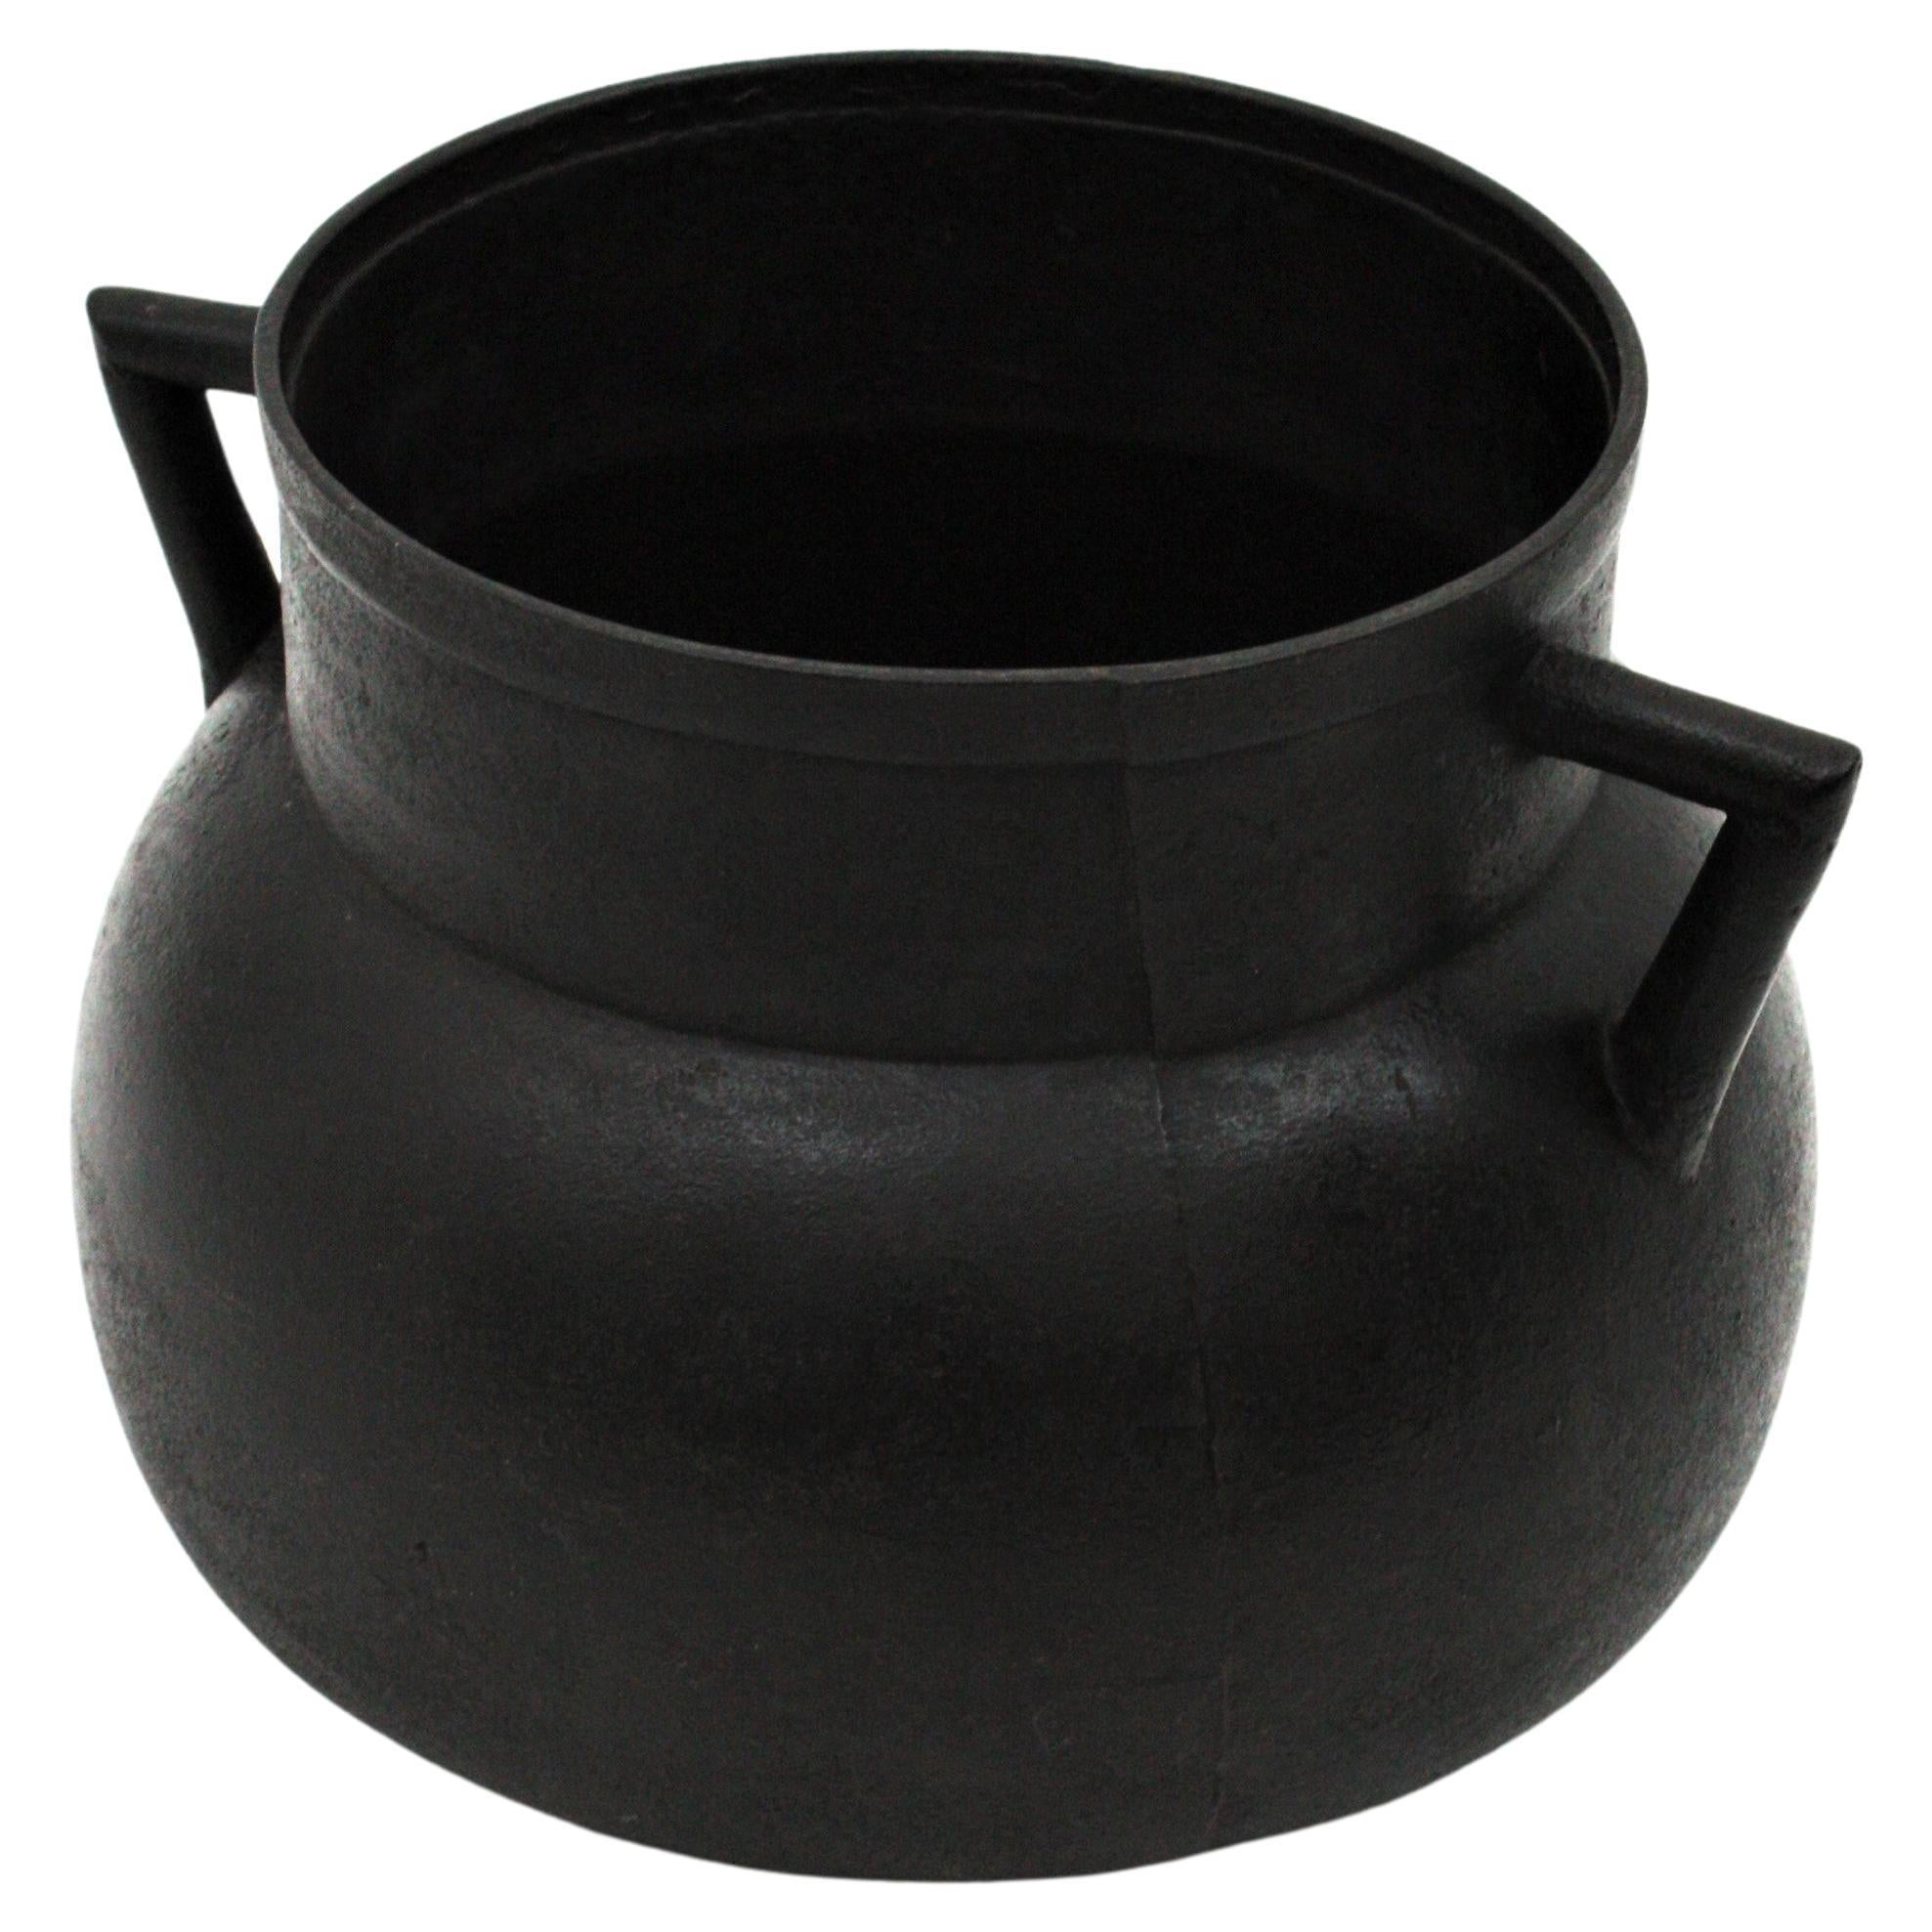 Cast iron kitchen cauldron with handles from Galicia, Spain, 1920s
Made in molded/cast iron, originally used for cooking. This cast iron vessel is heavily constructed, it is strong and sturdy and ready to be used. It has a nice aged